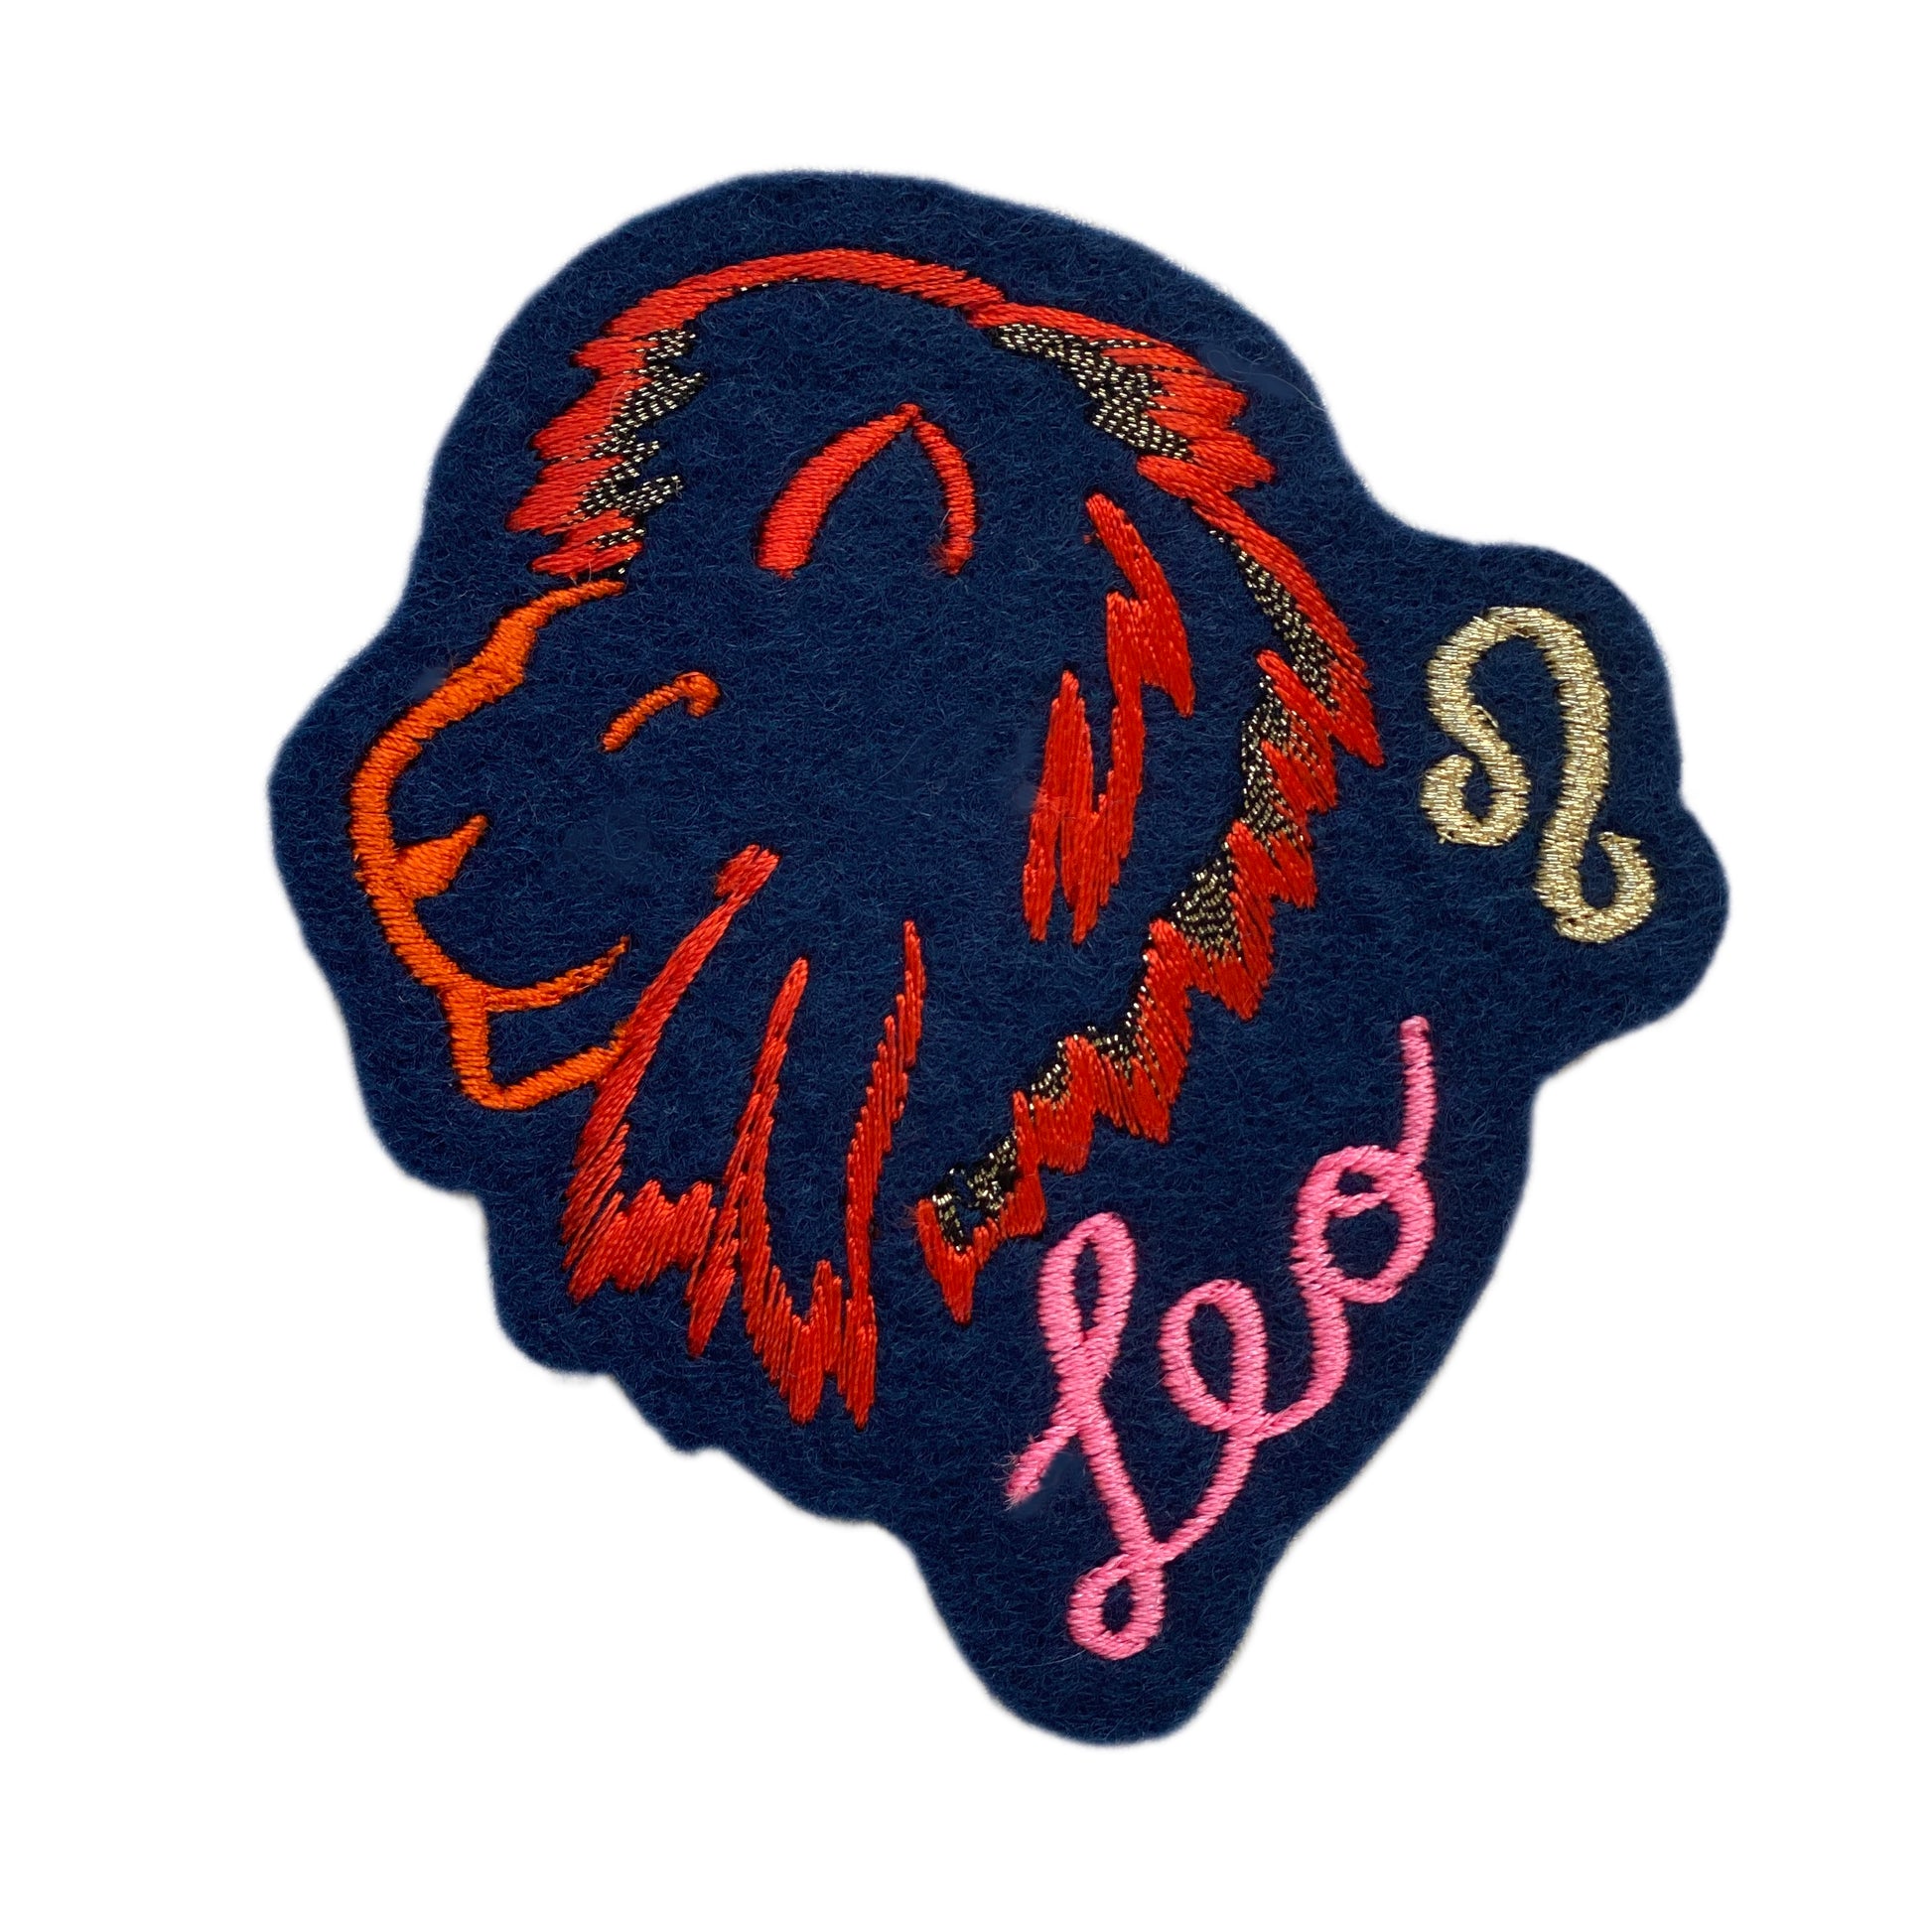 Leo embroidered patch on white background